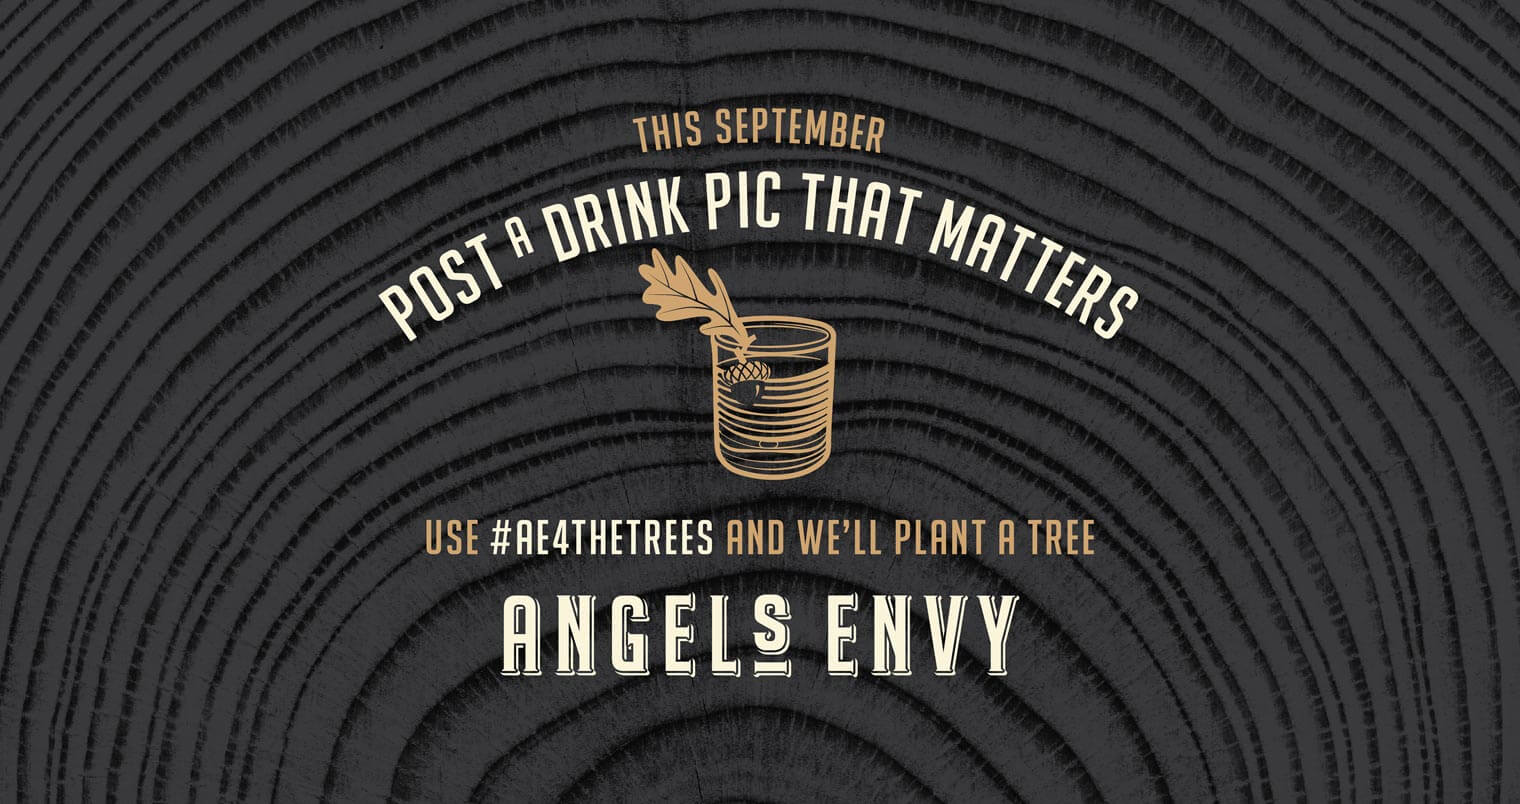 Angel's Envy To Plant 4,000 White Oak Trees After 'Toast the Trees' Initiative